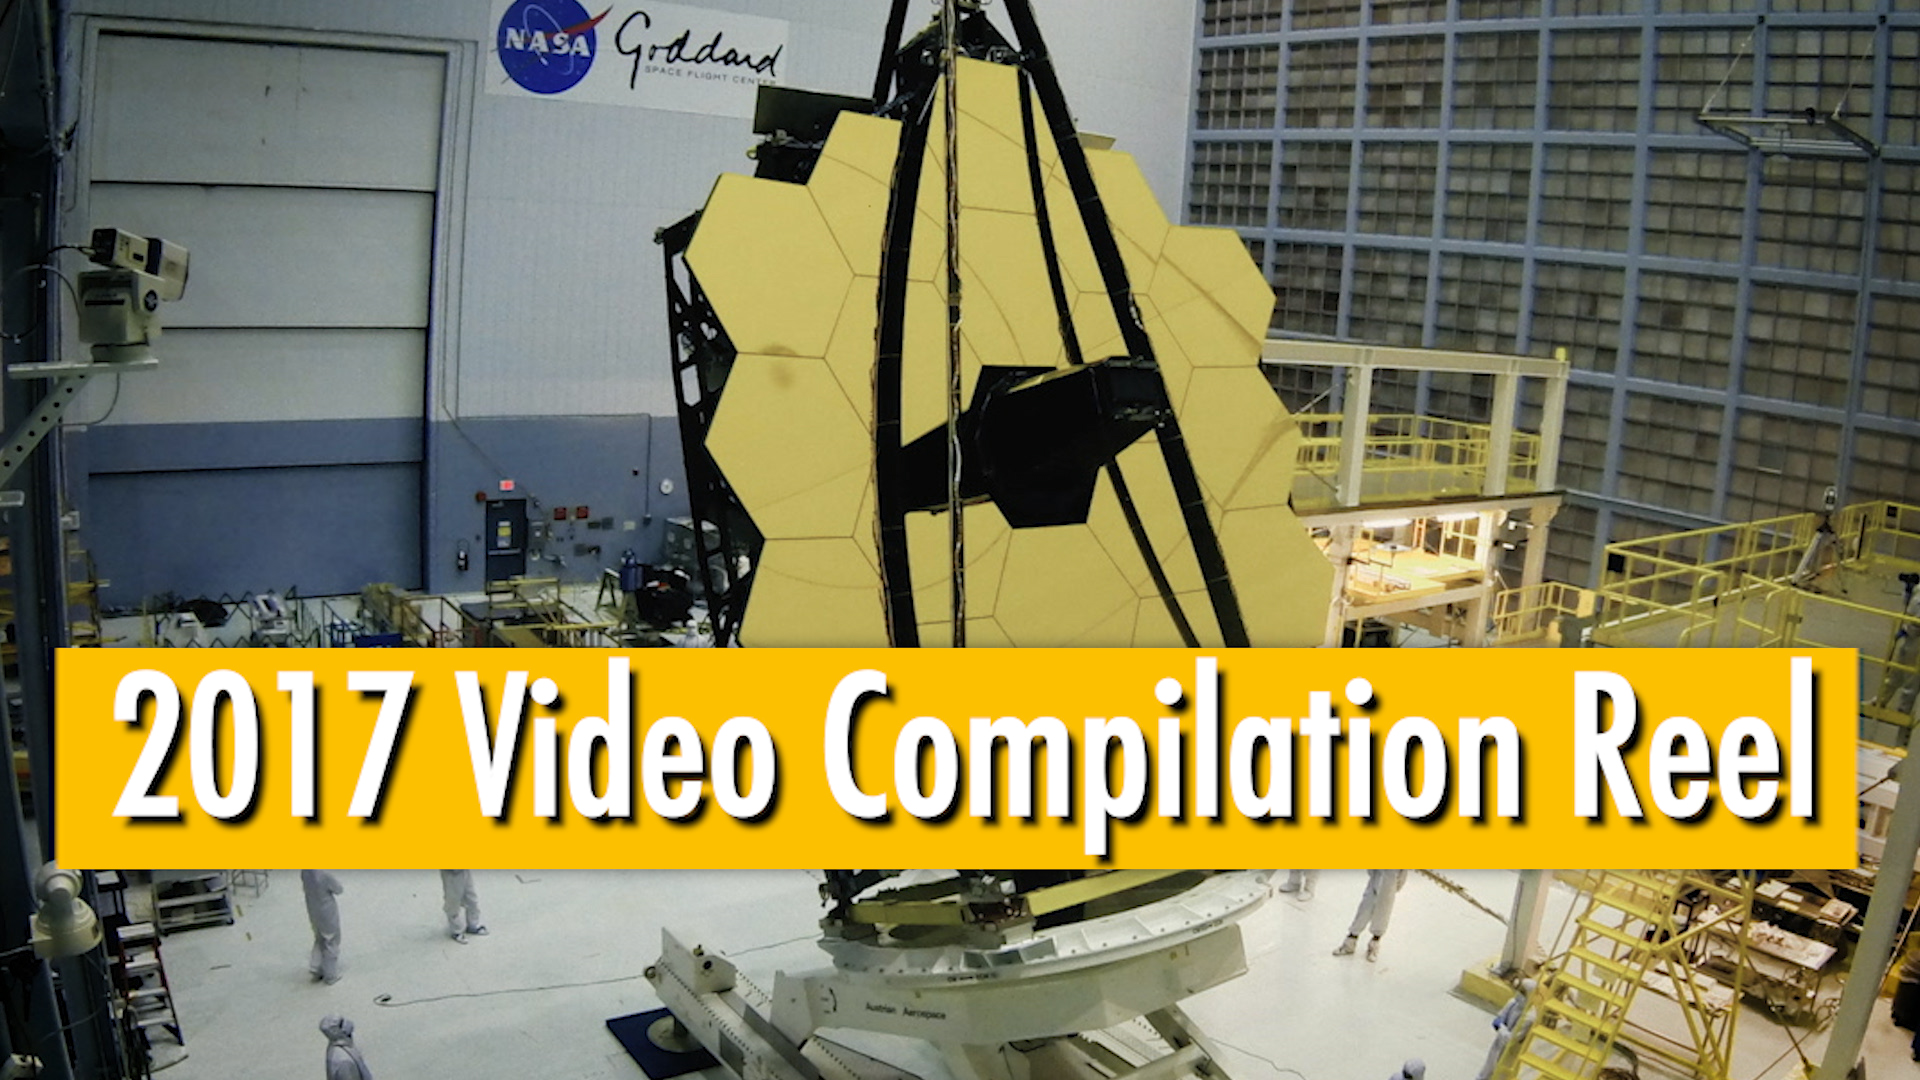 A compilation of Webb Telescope videos.